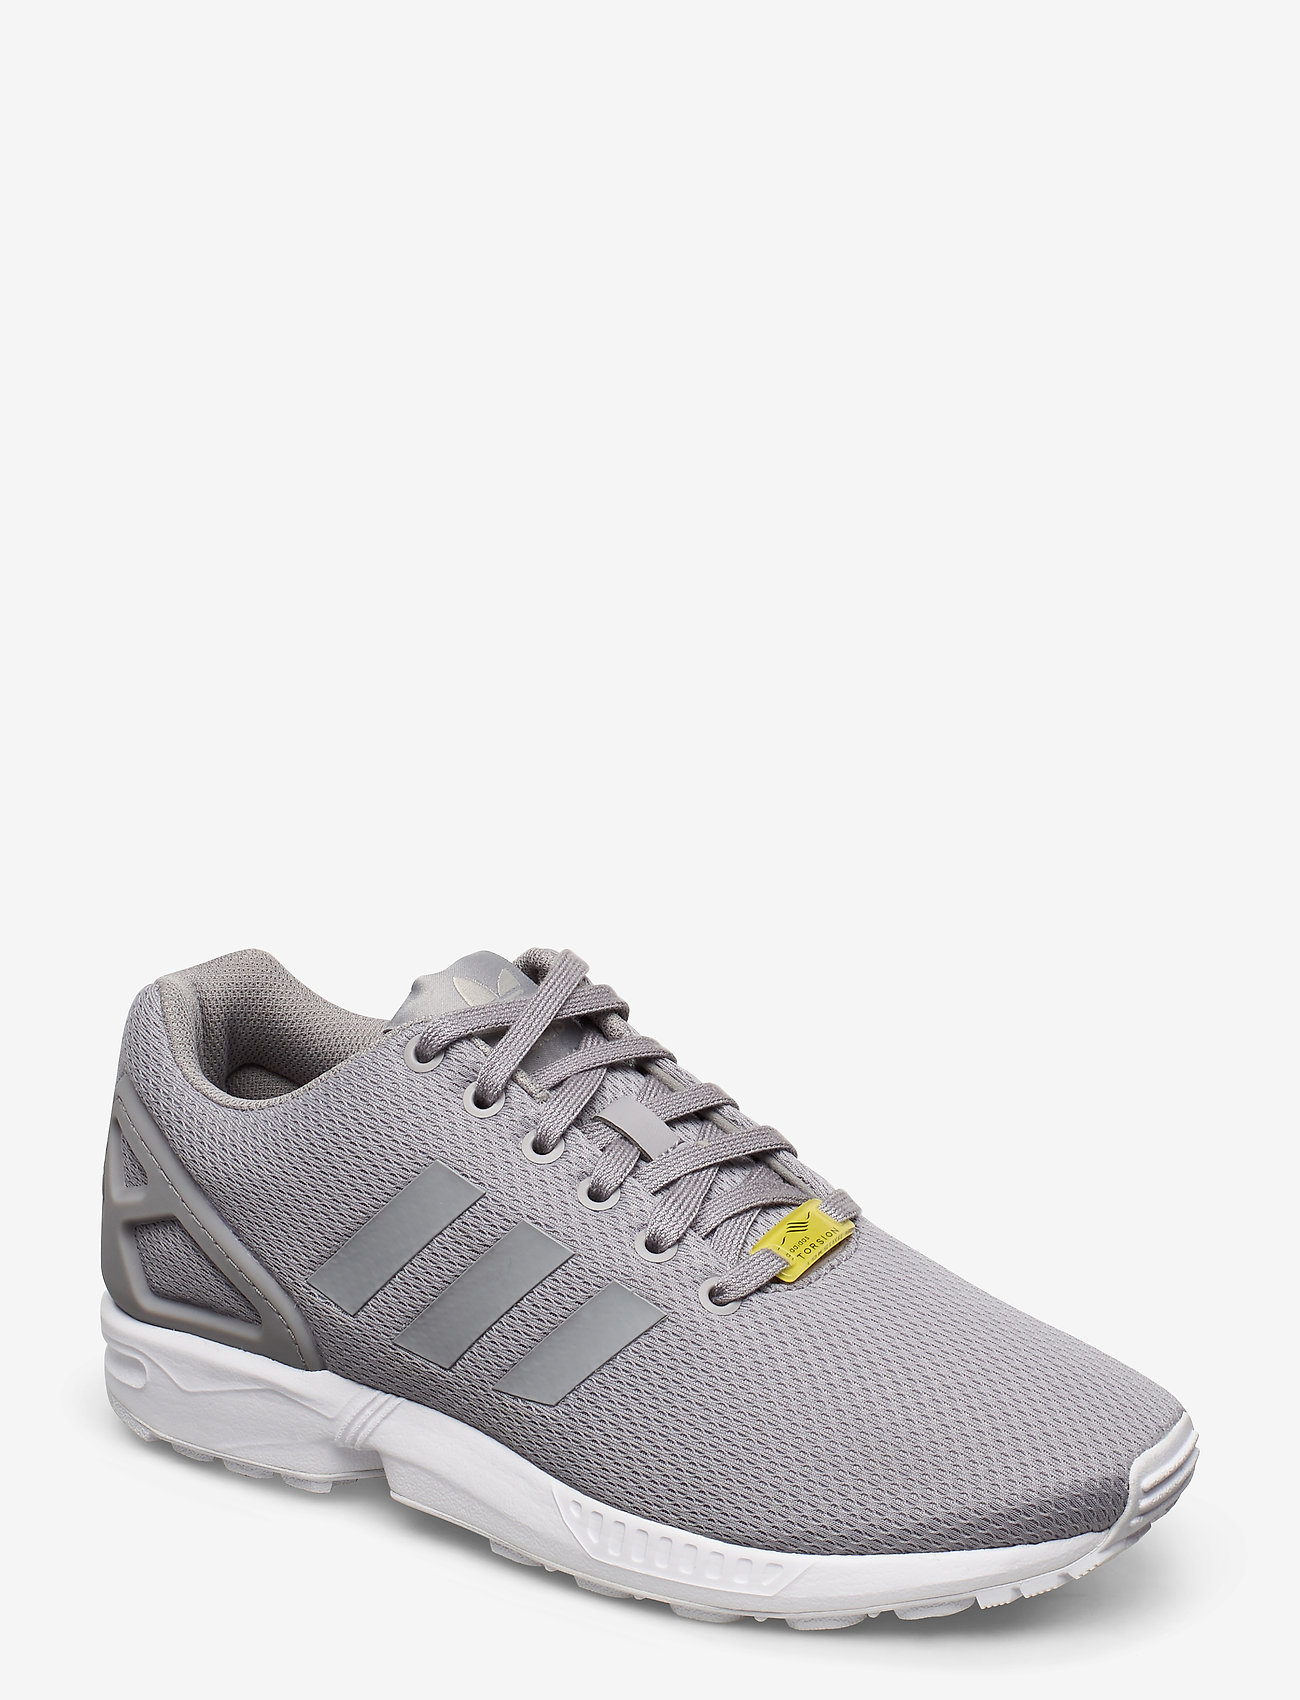 adidas zx flux you re welcome